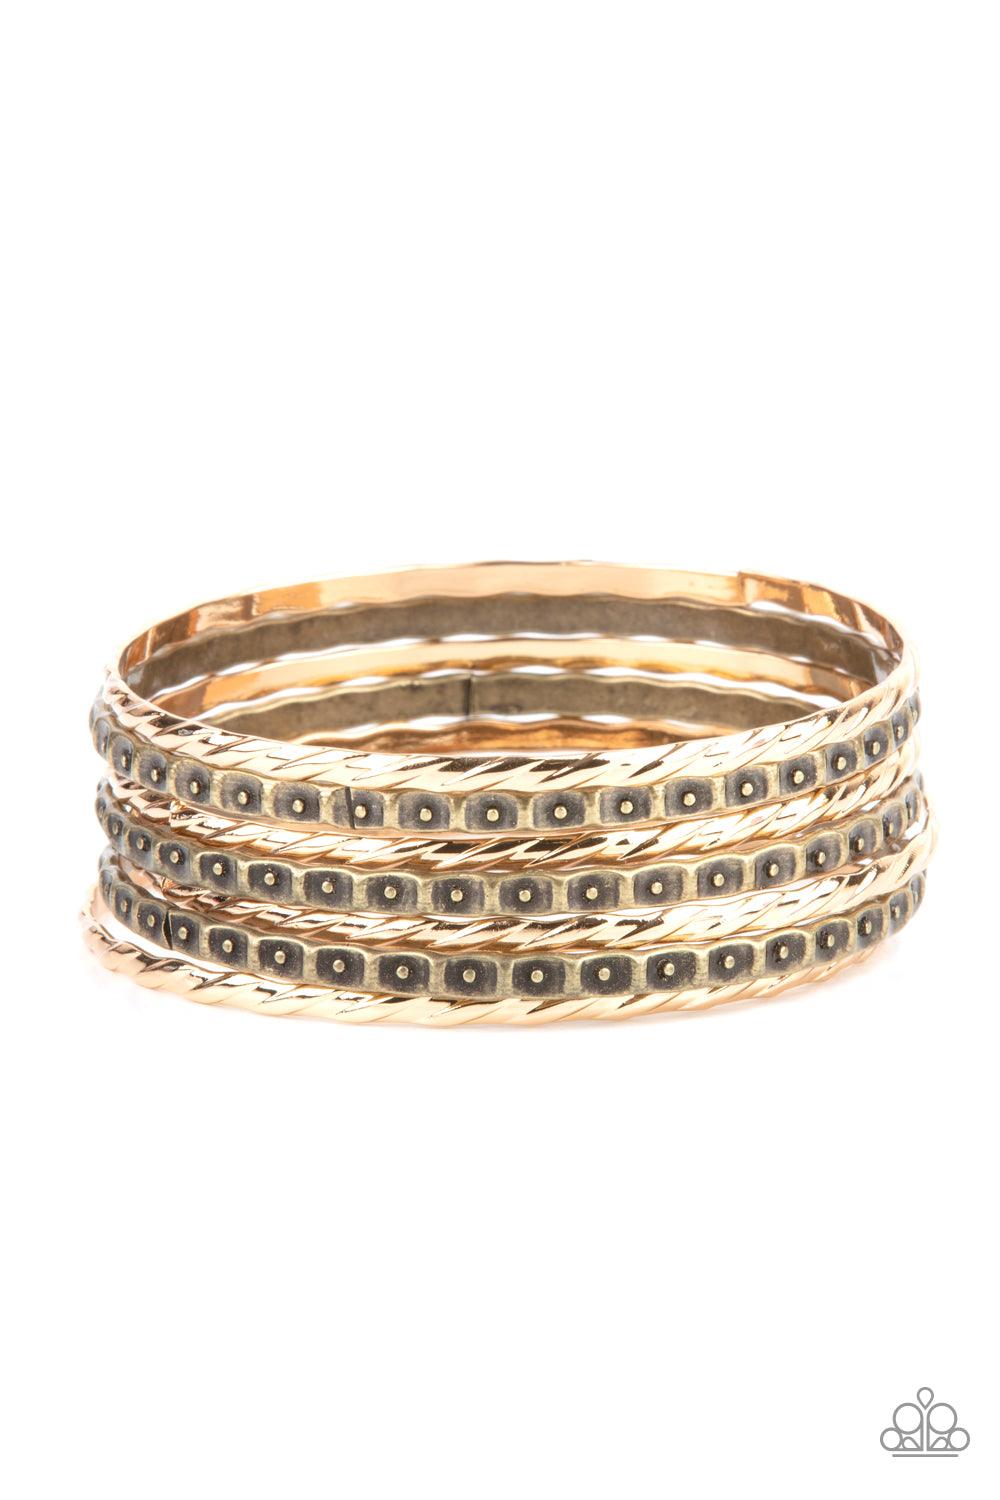 Paparazzi Accessories Back-To-Back Stacks - Multi Embossed in slanted ribbons of textured and studded hammered patterns, trios of mismatched brass and gold bangles stack across the wrist for an intense industrial vibe. Sold as one set of six bracelets. Je